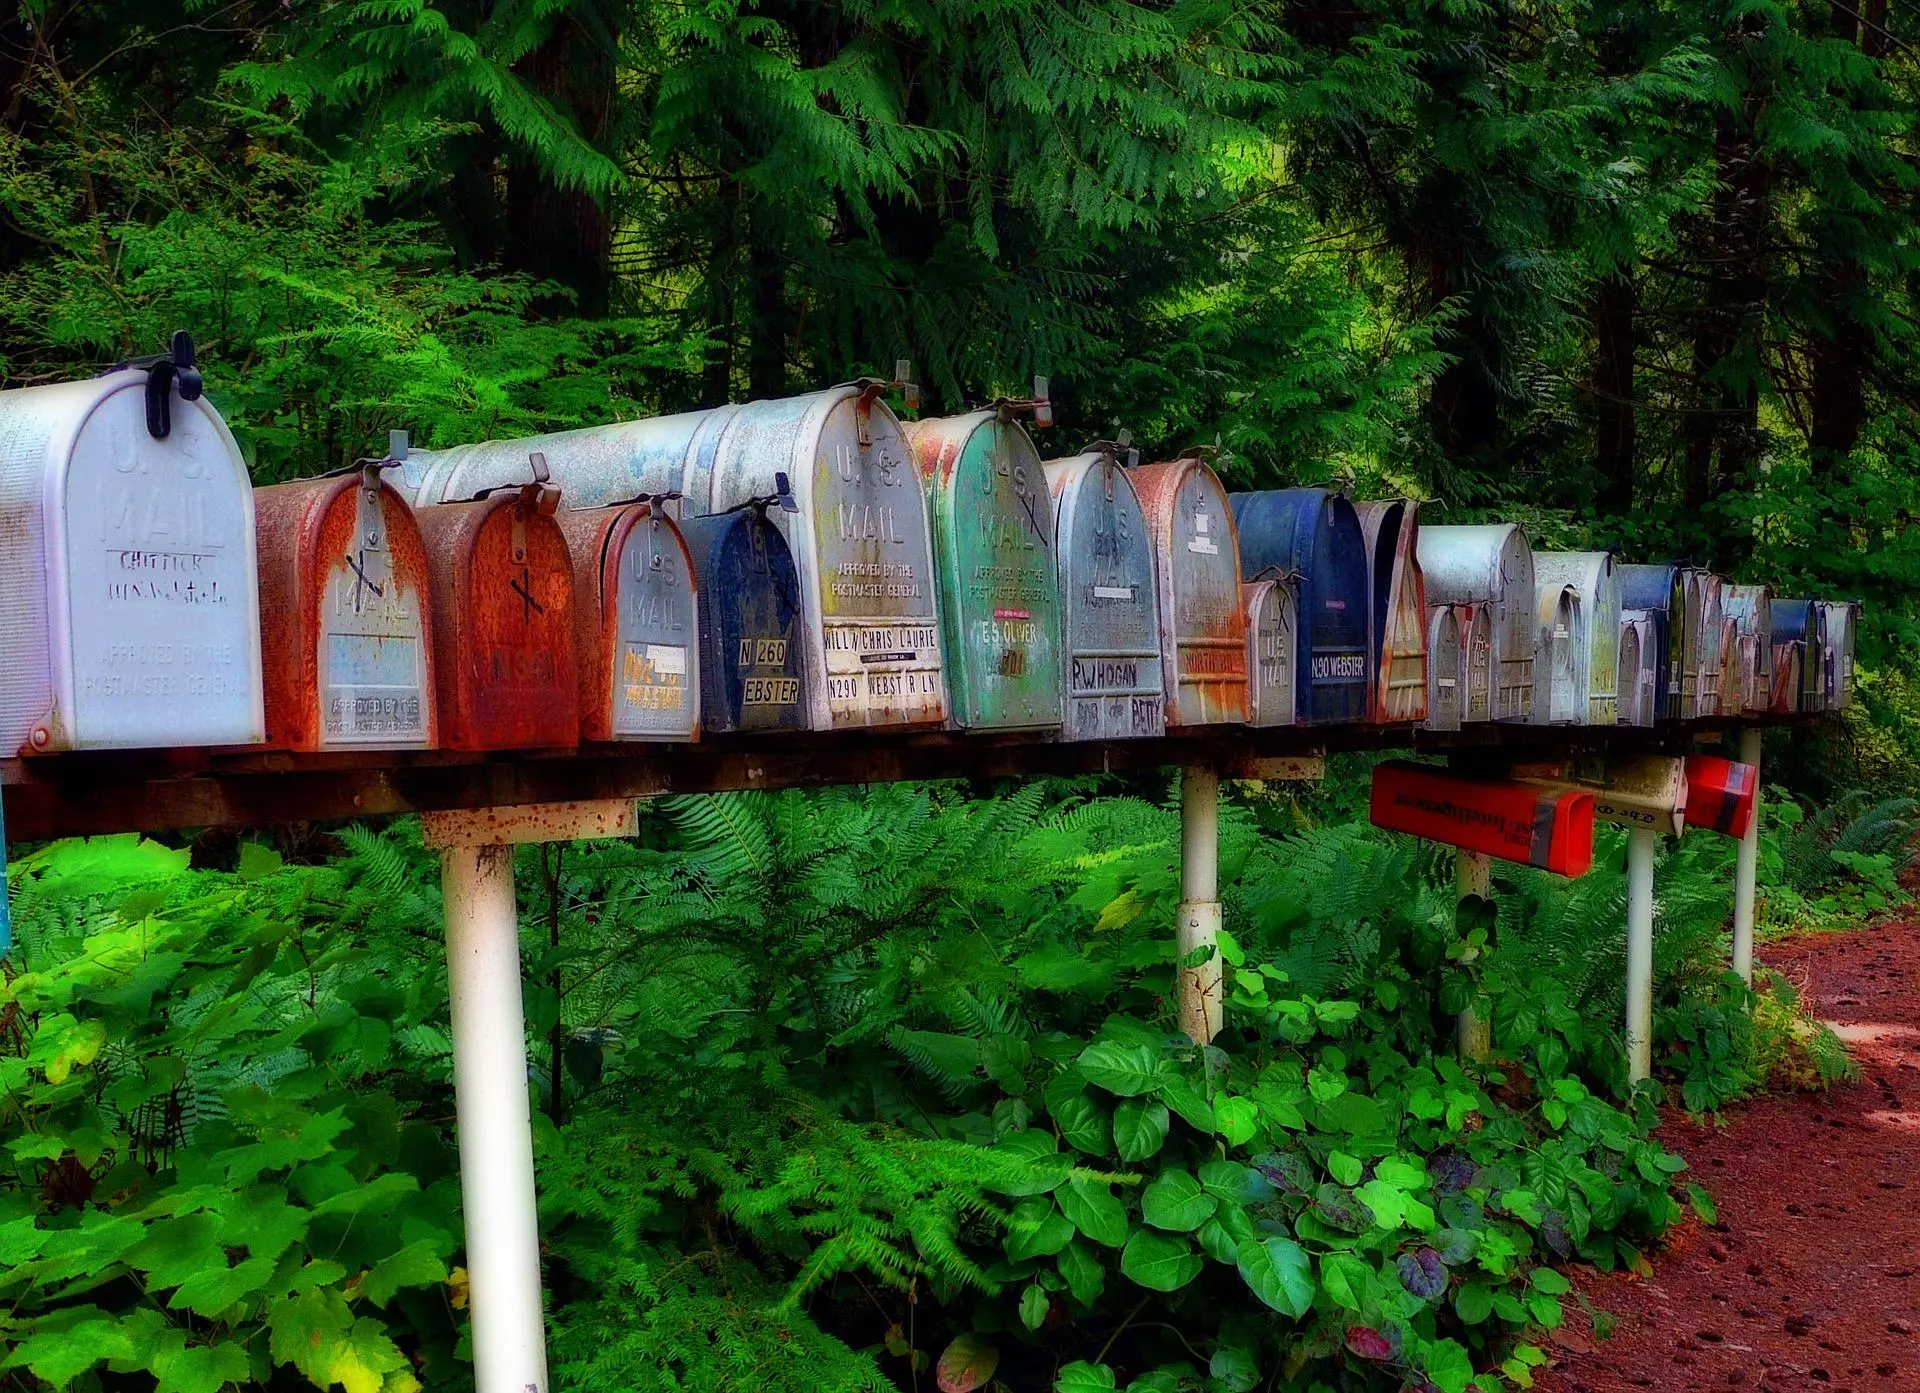 How long does USPS forward mail?